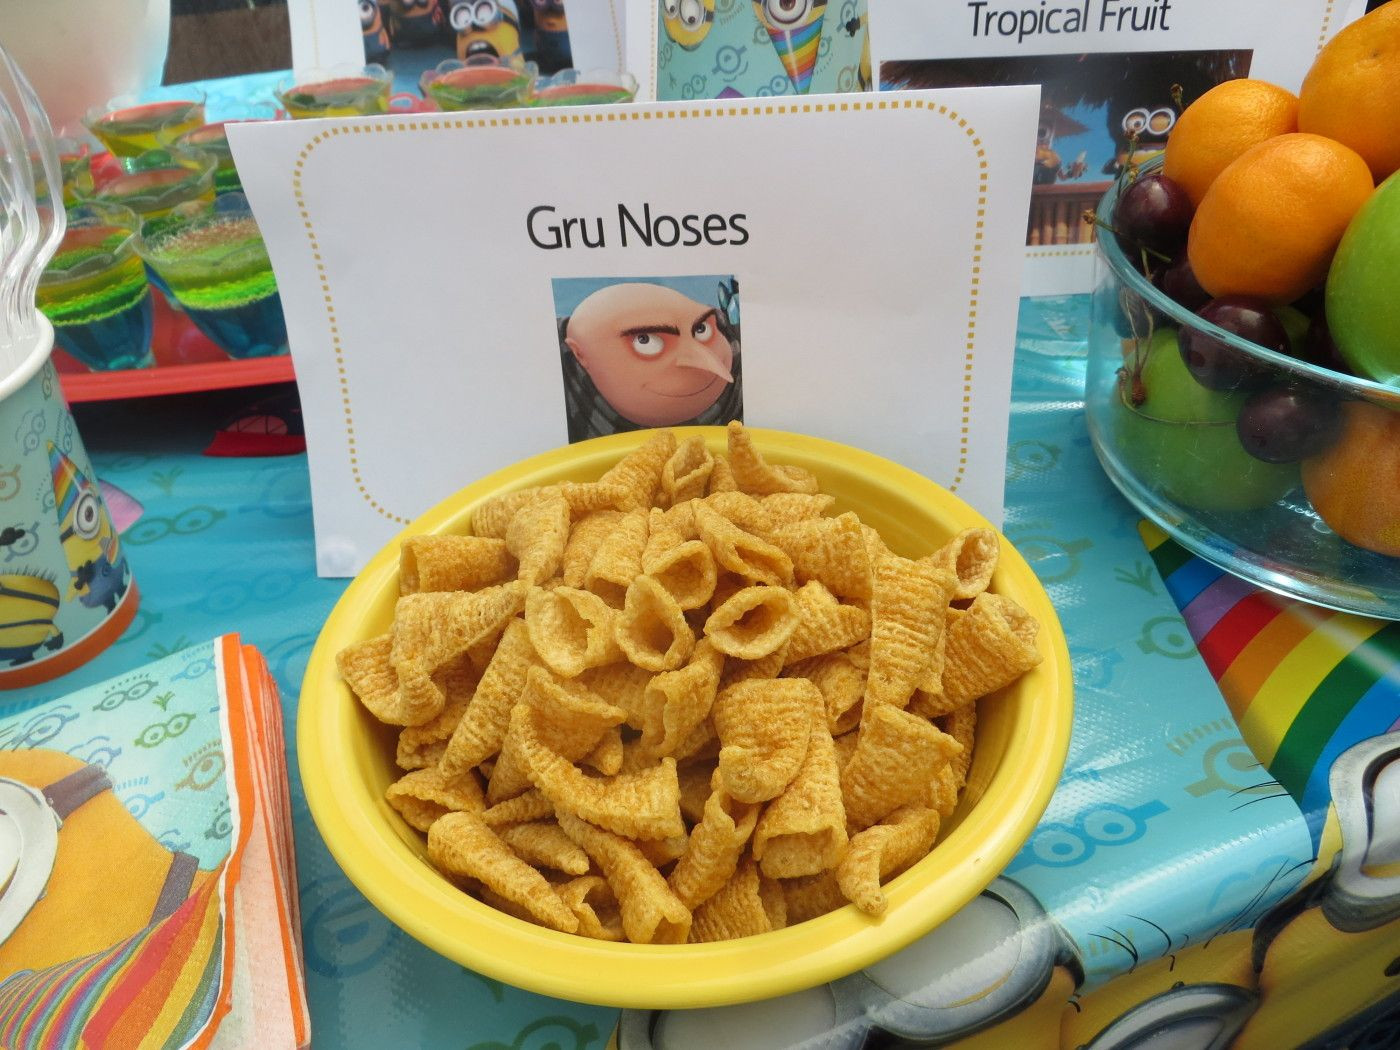 Despicable Me Party Food Ideas
 "Gru Noses" using bugal chips Food Idea for Despicable Me